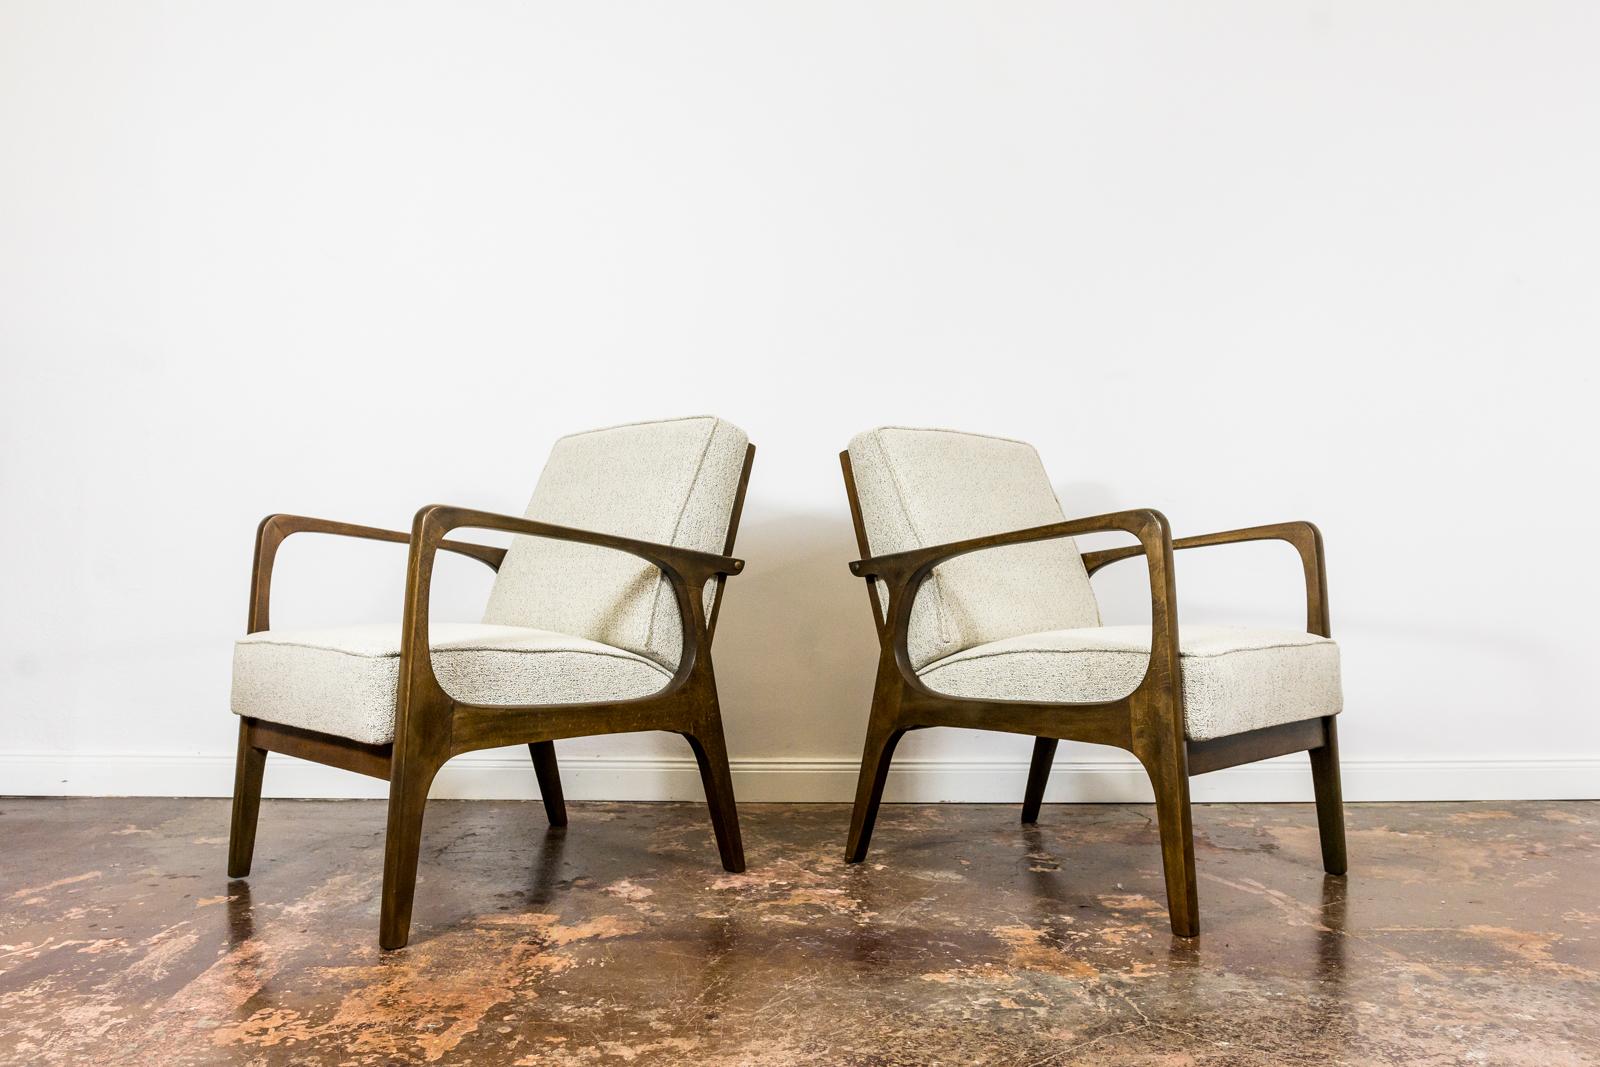 Pair of Mid-Century Armchairs from Prudnickie Fabryki Mebli 1960's, Poland For Sale 2